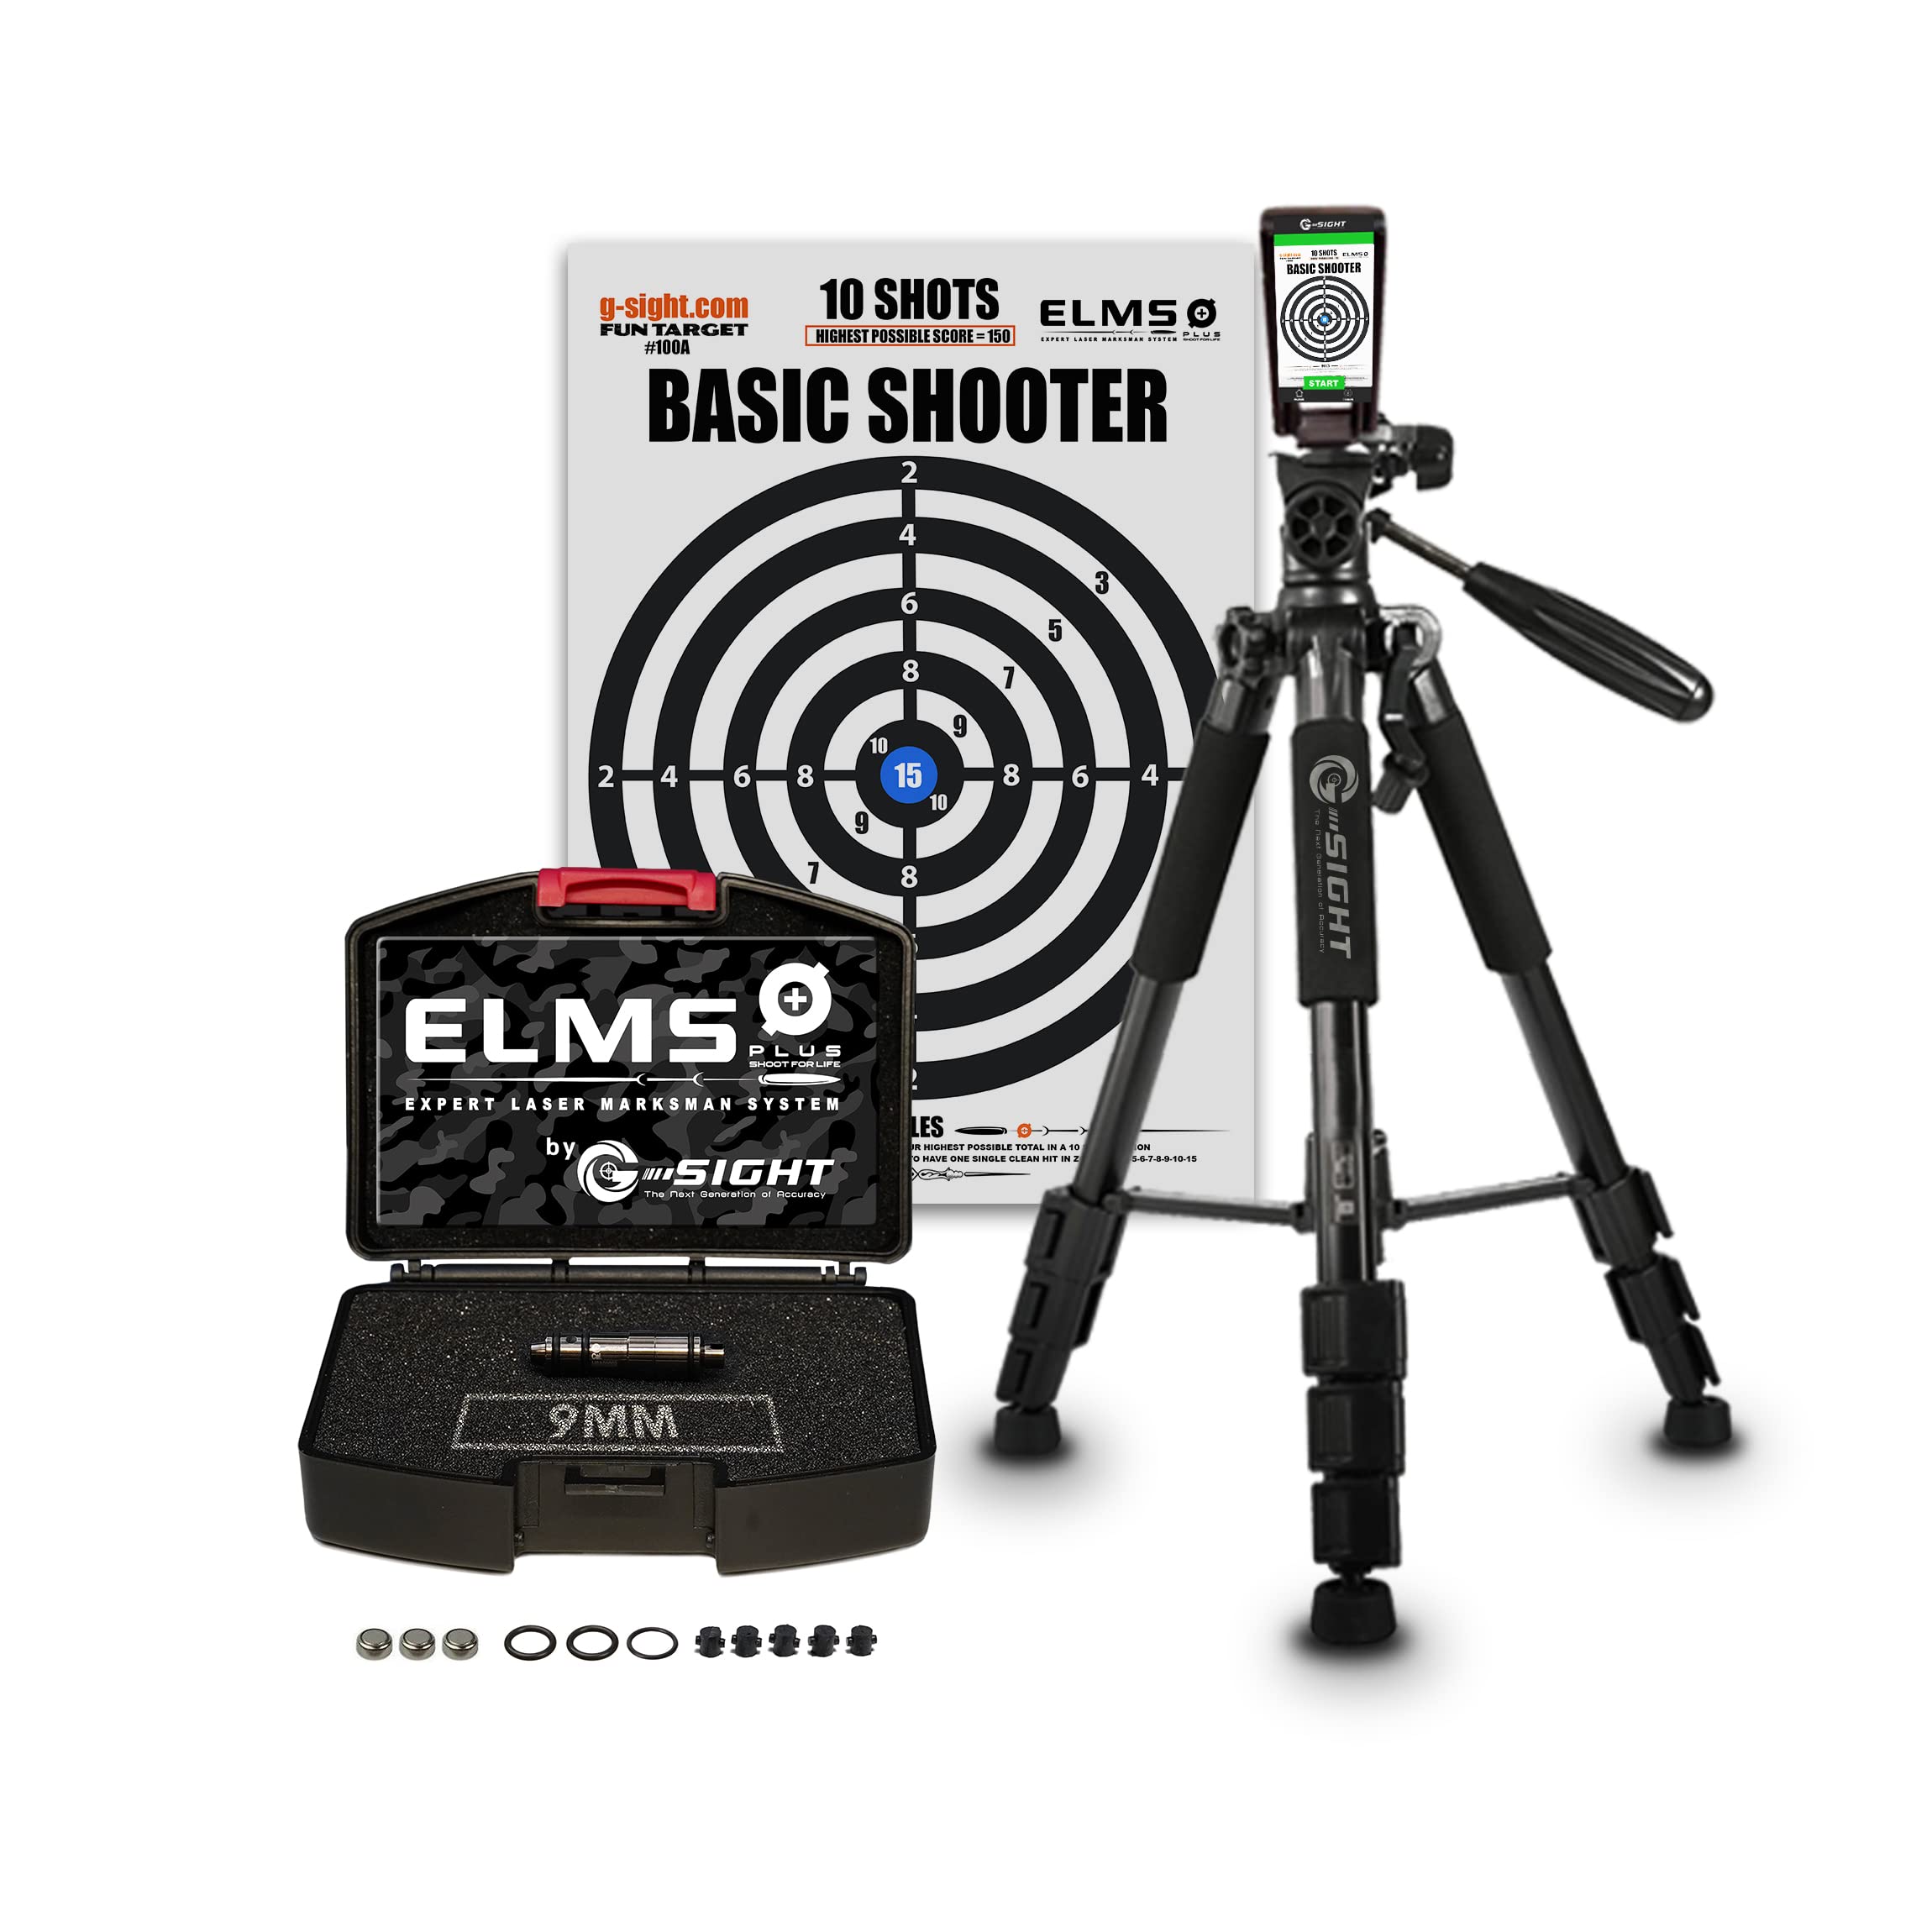 g-Sight ELMS Plus PROPAcK 9mm Snap cap Dry Fire Laser Training System, iPhoneAndroid Shot Timer App, Laser Target Training for D